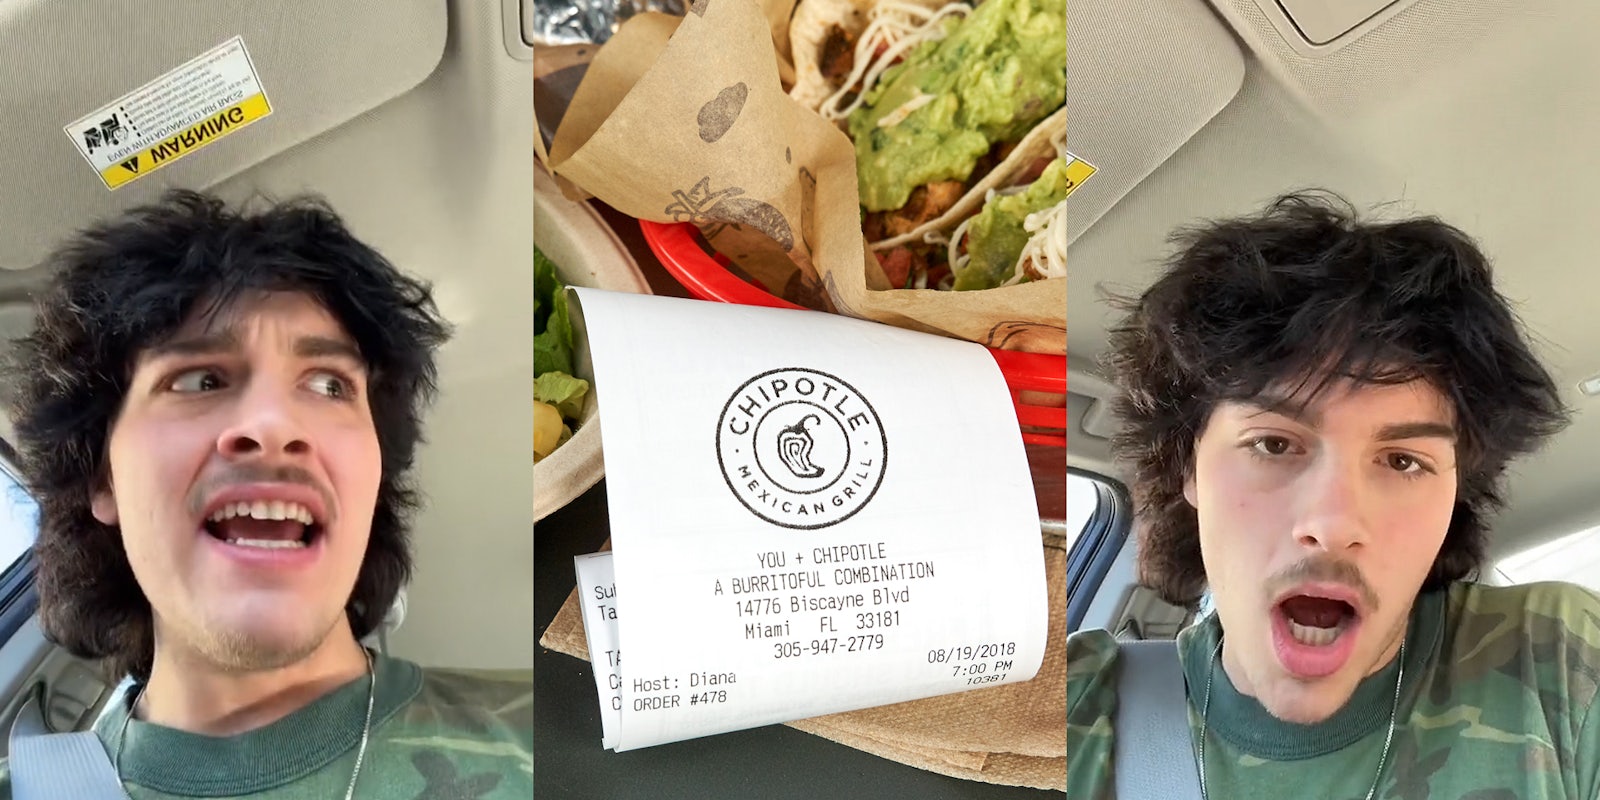 man speaking in car looking right (l) Chipotle receipt with food on table (c) man speaking in car (r)